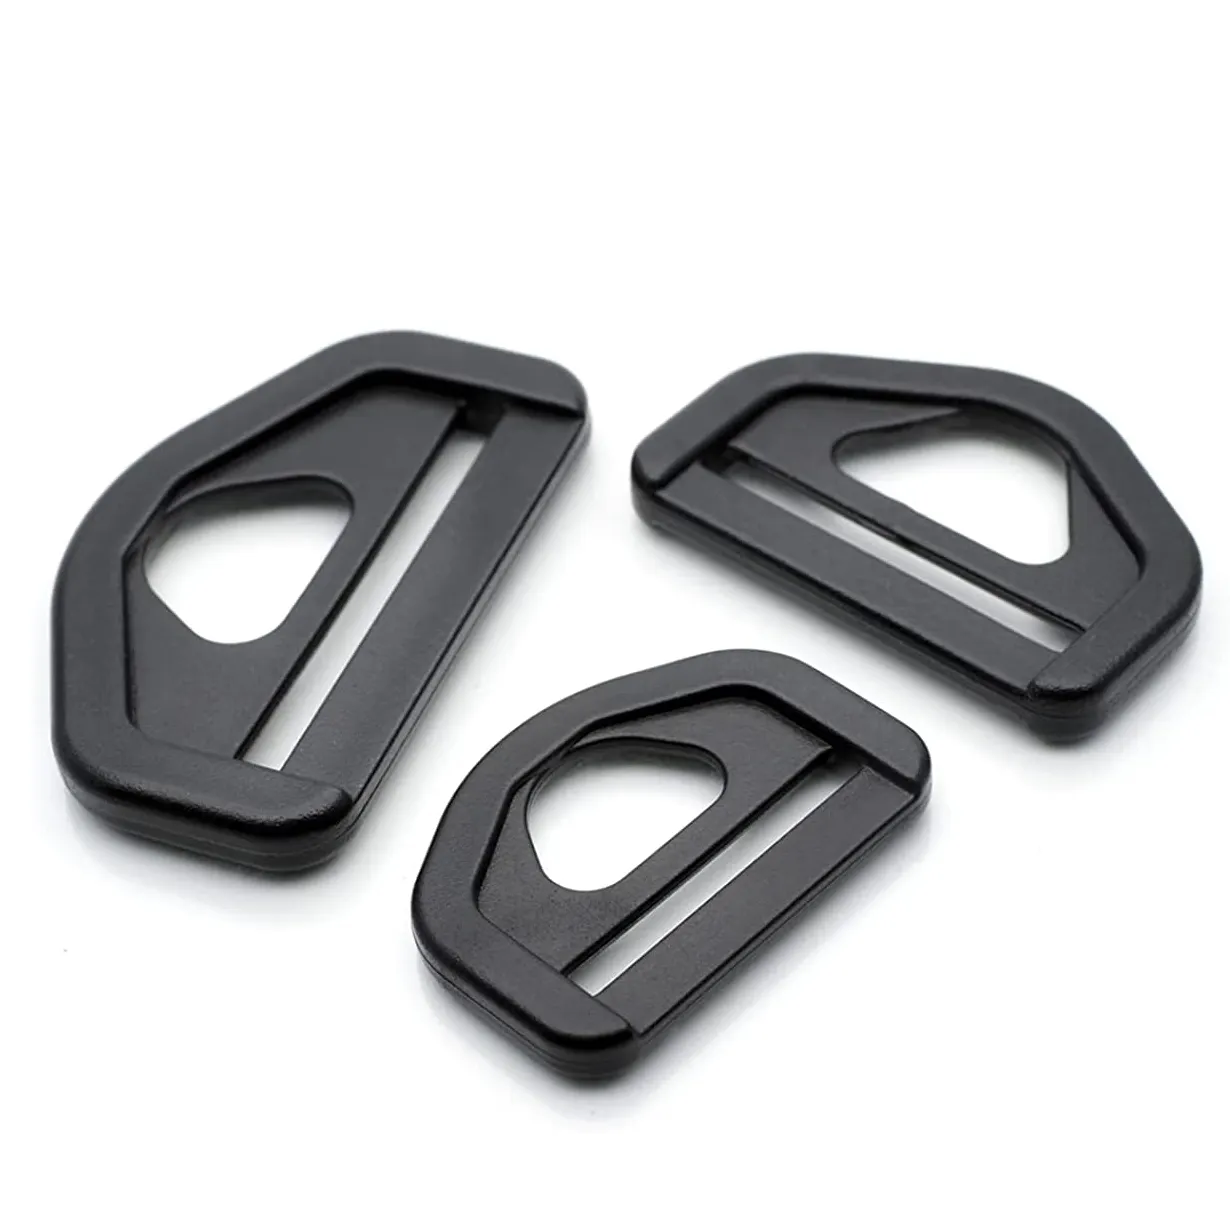 2 Inch Triangle Ring Buckles Strap Connector 50mm Plastic Bar Slide Quality Purse Bag Loops Craft D Ring Buckle